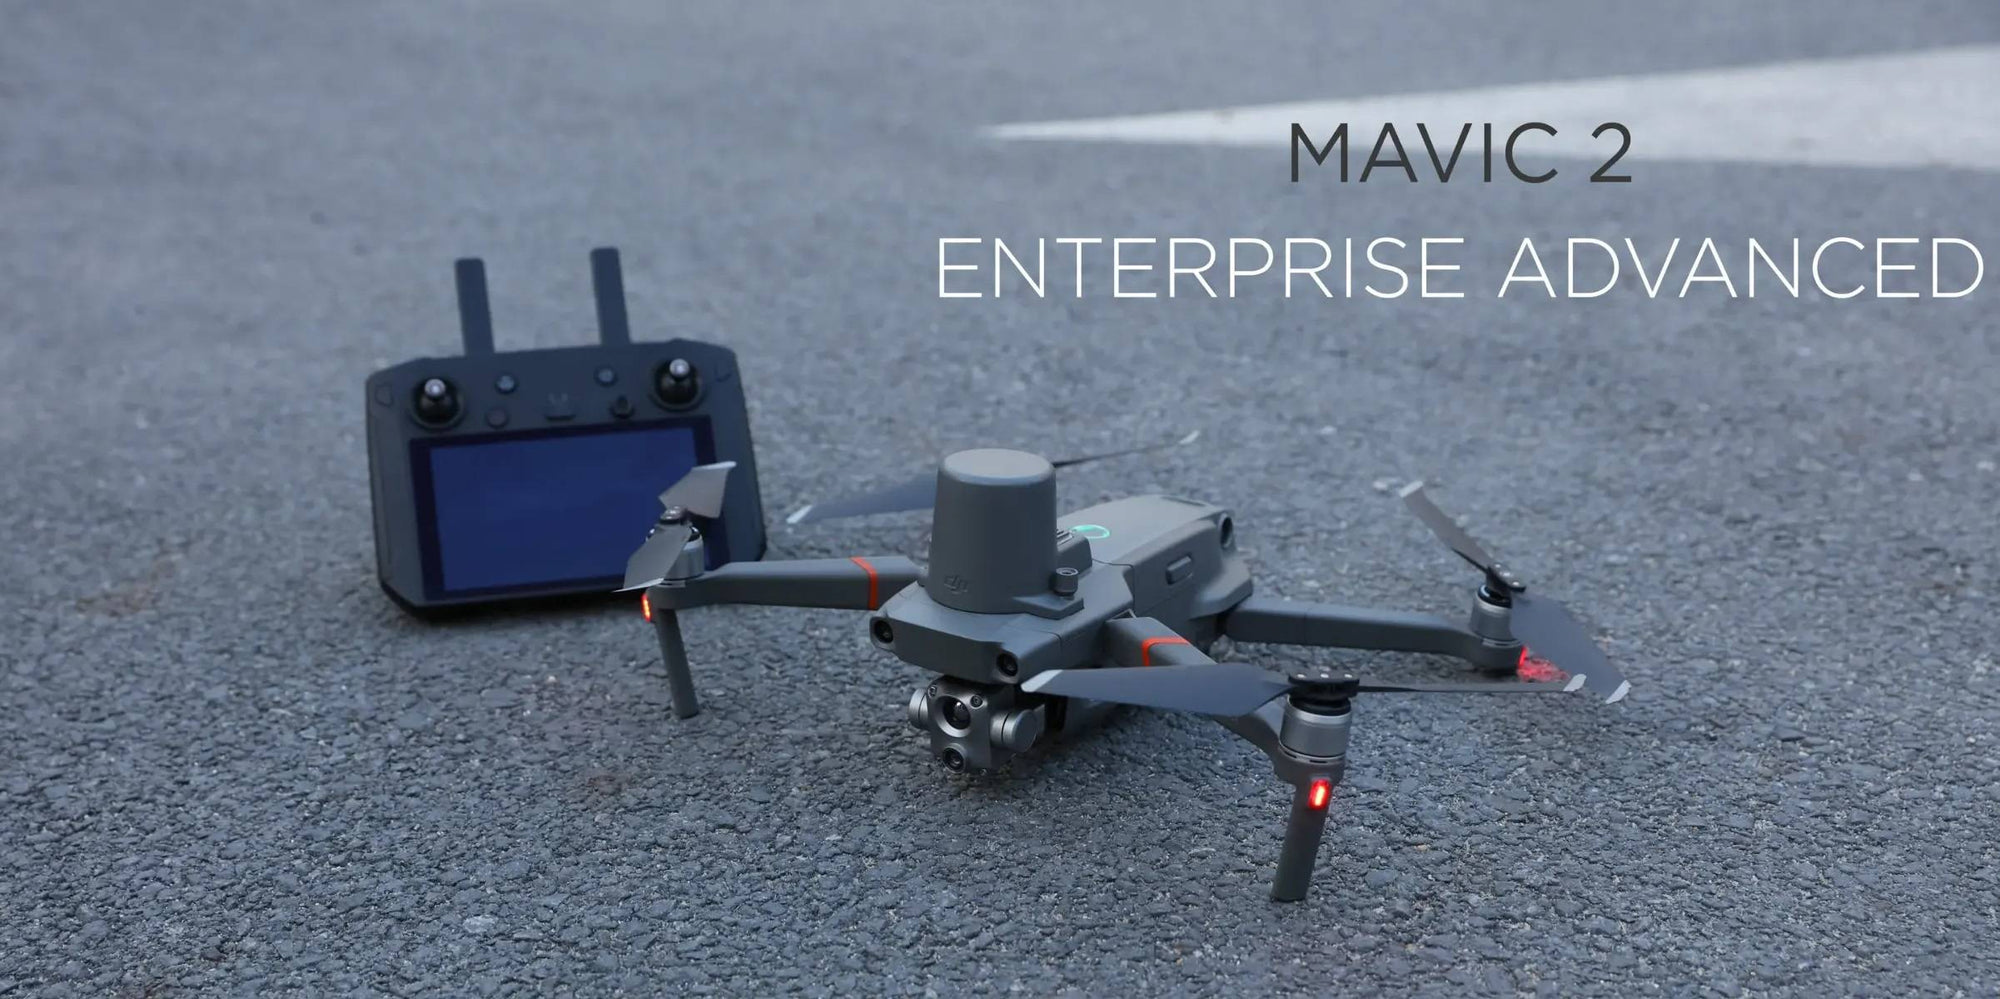 Mavic 2 Enterprise Advanced: The Best In Compact Thermal And Visual Imaging